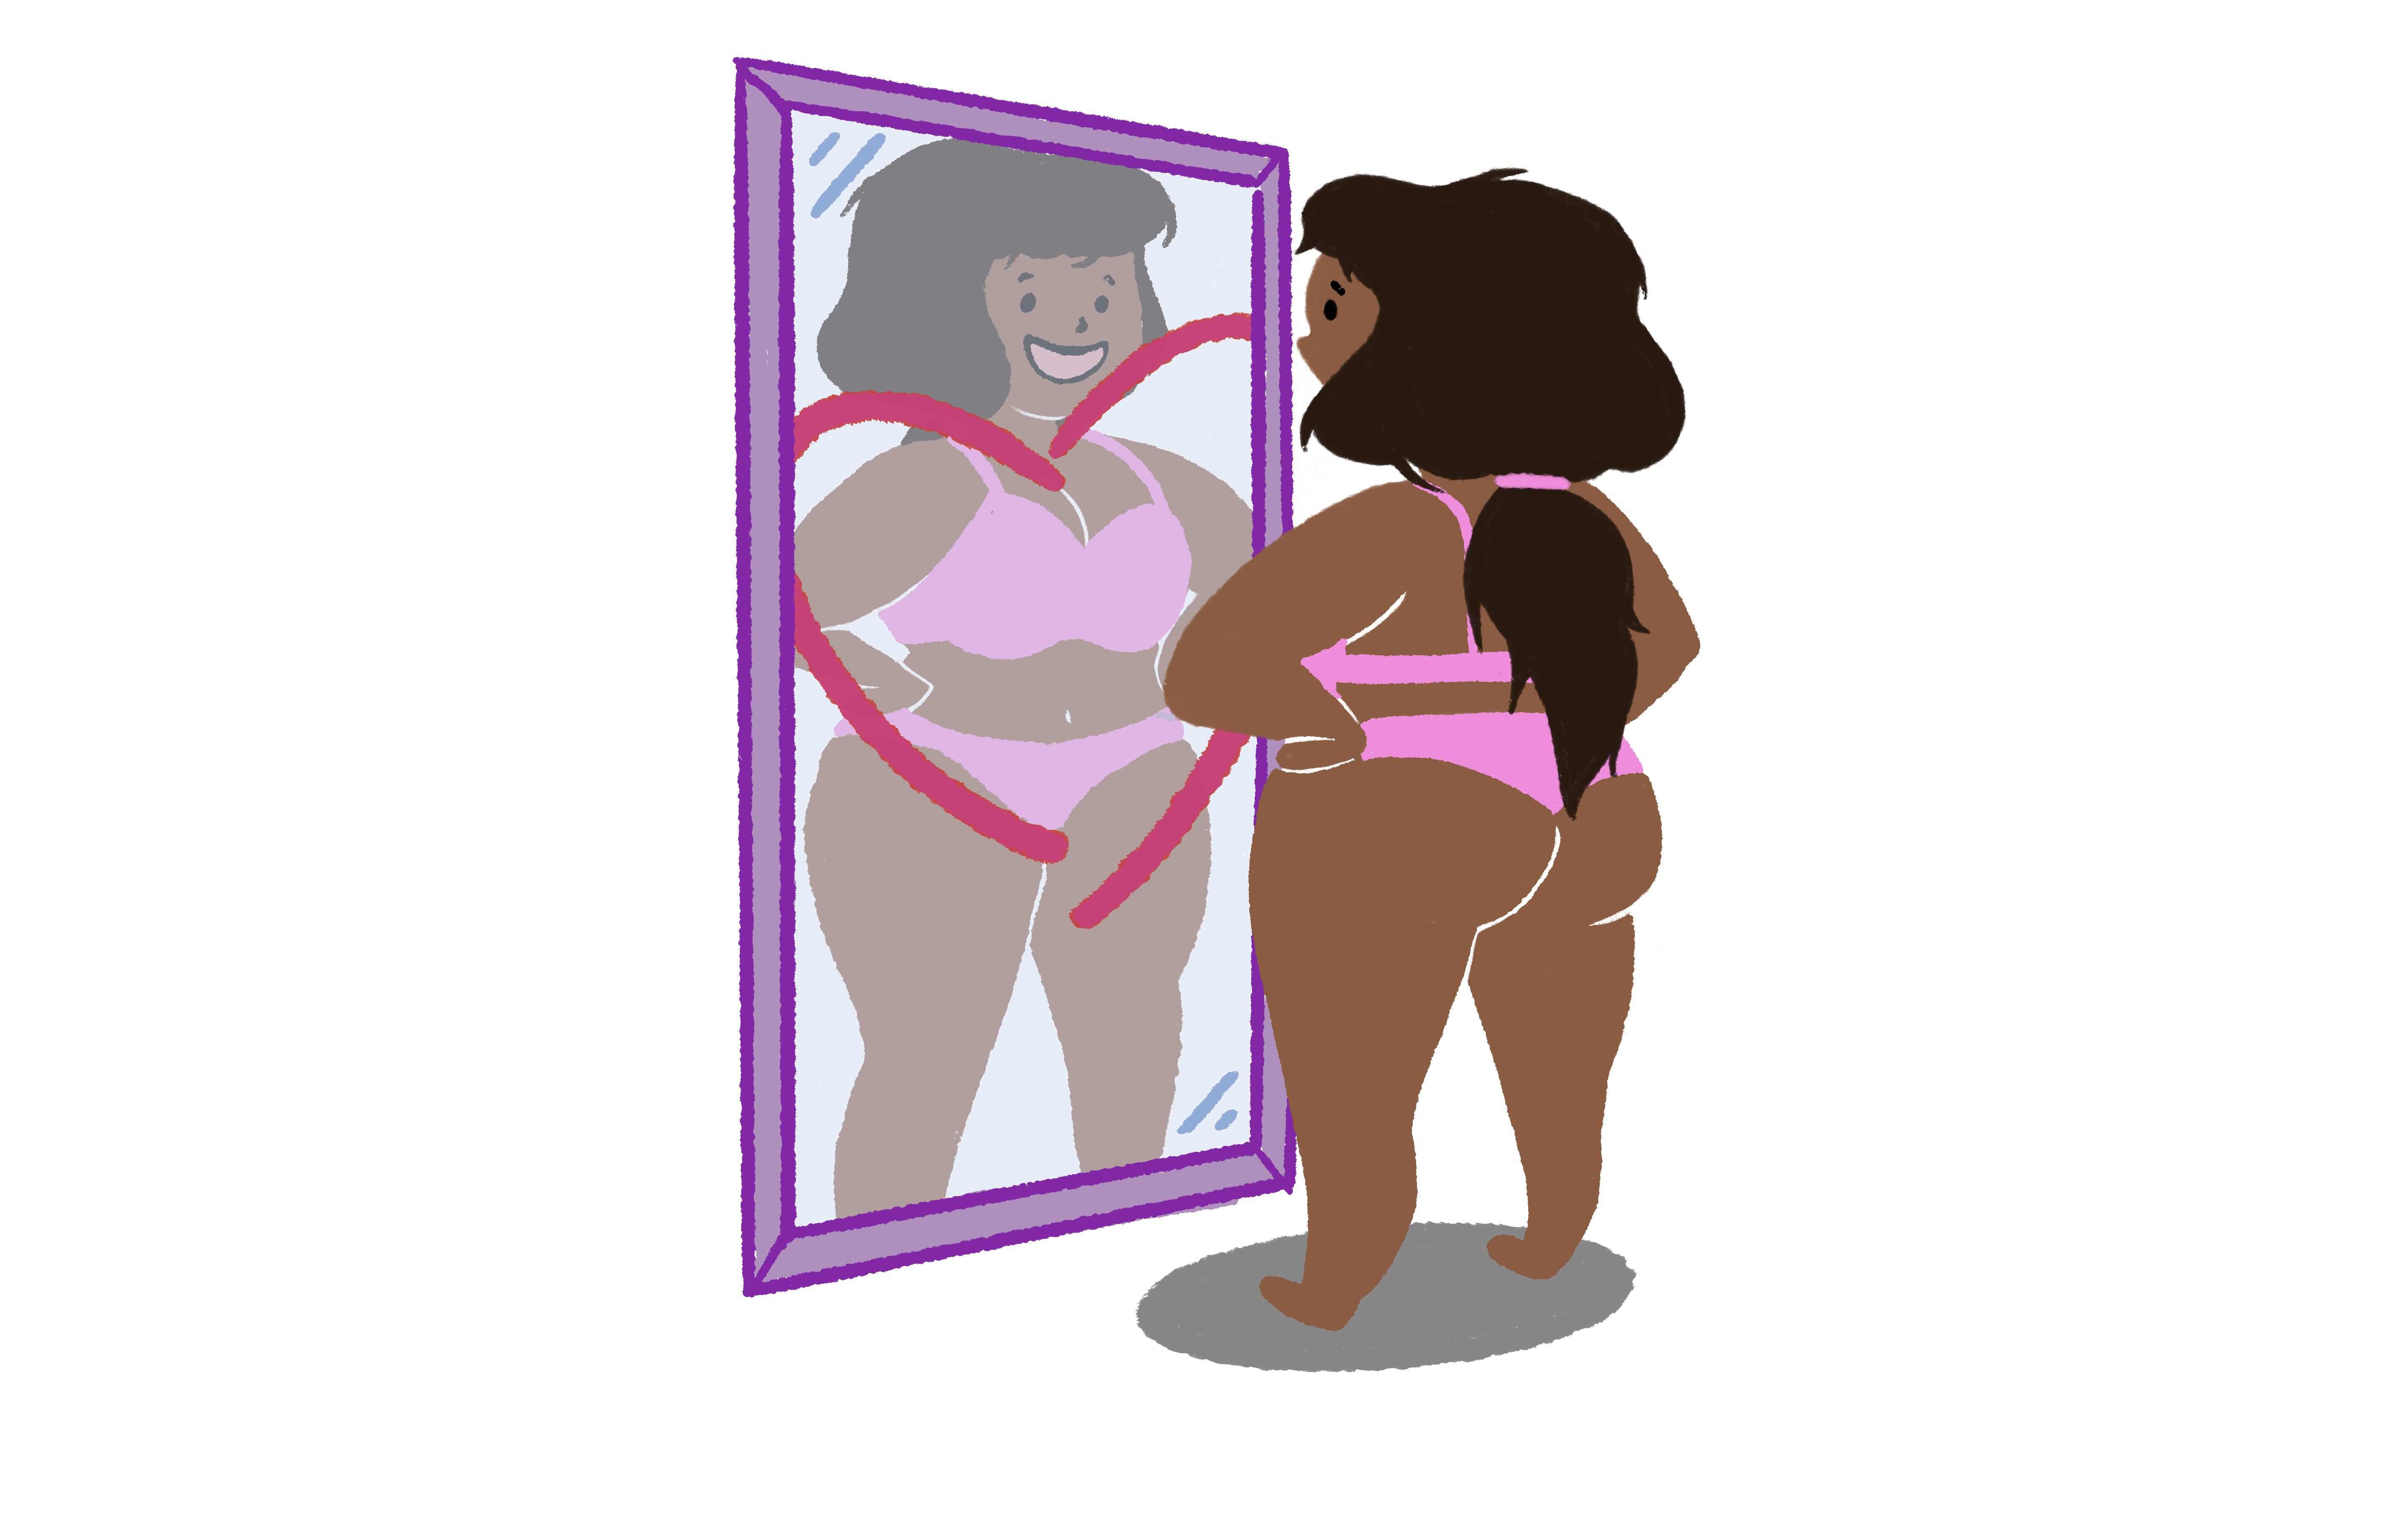 Why the body positivity movement risks turning toxic